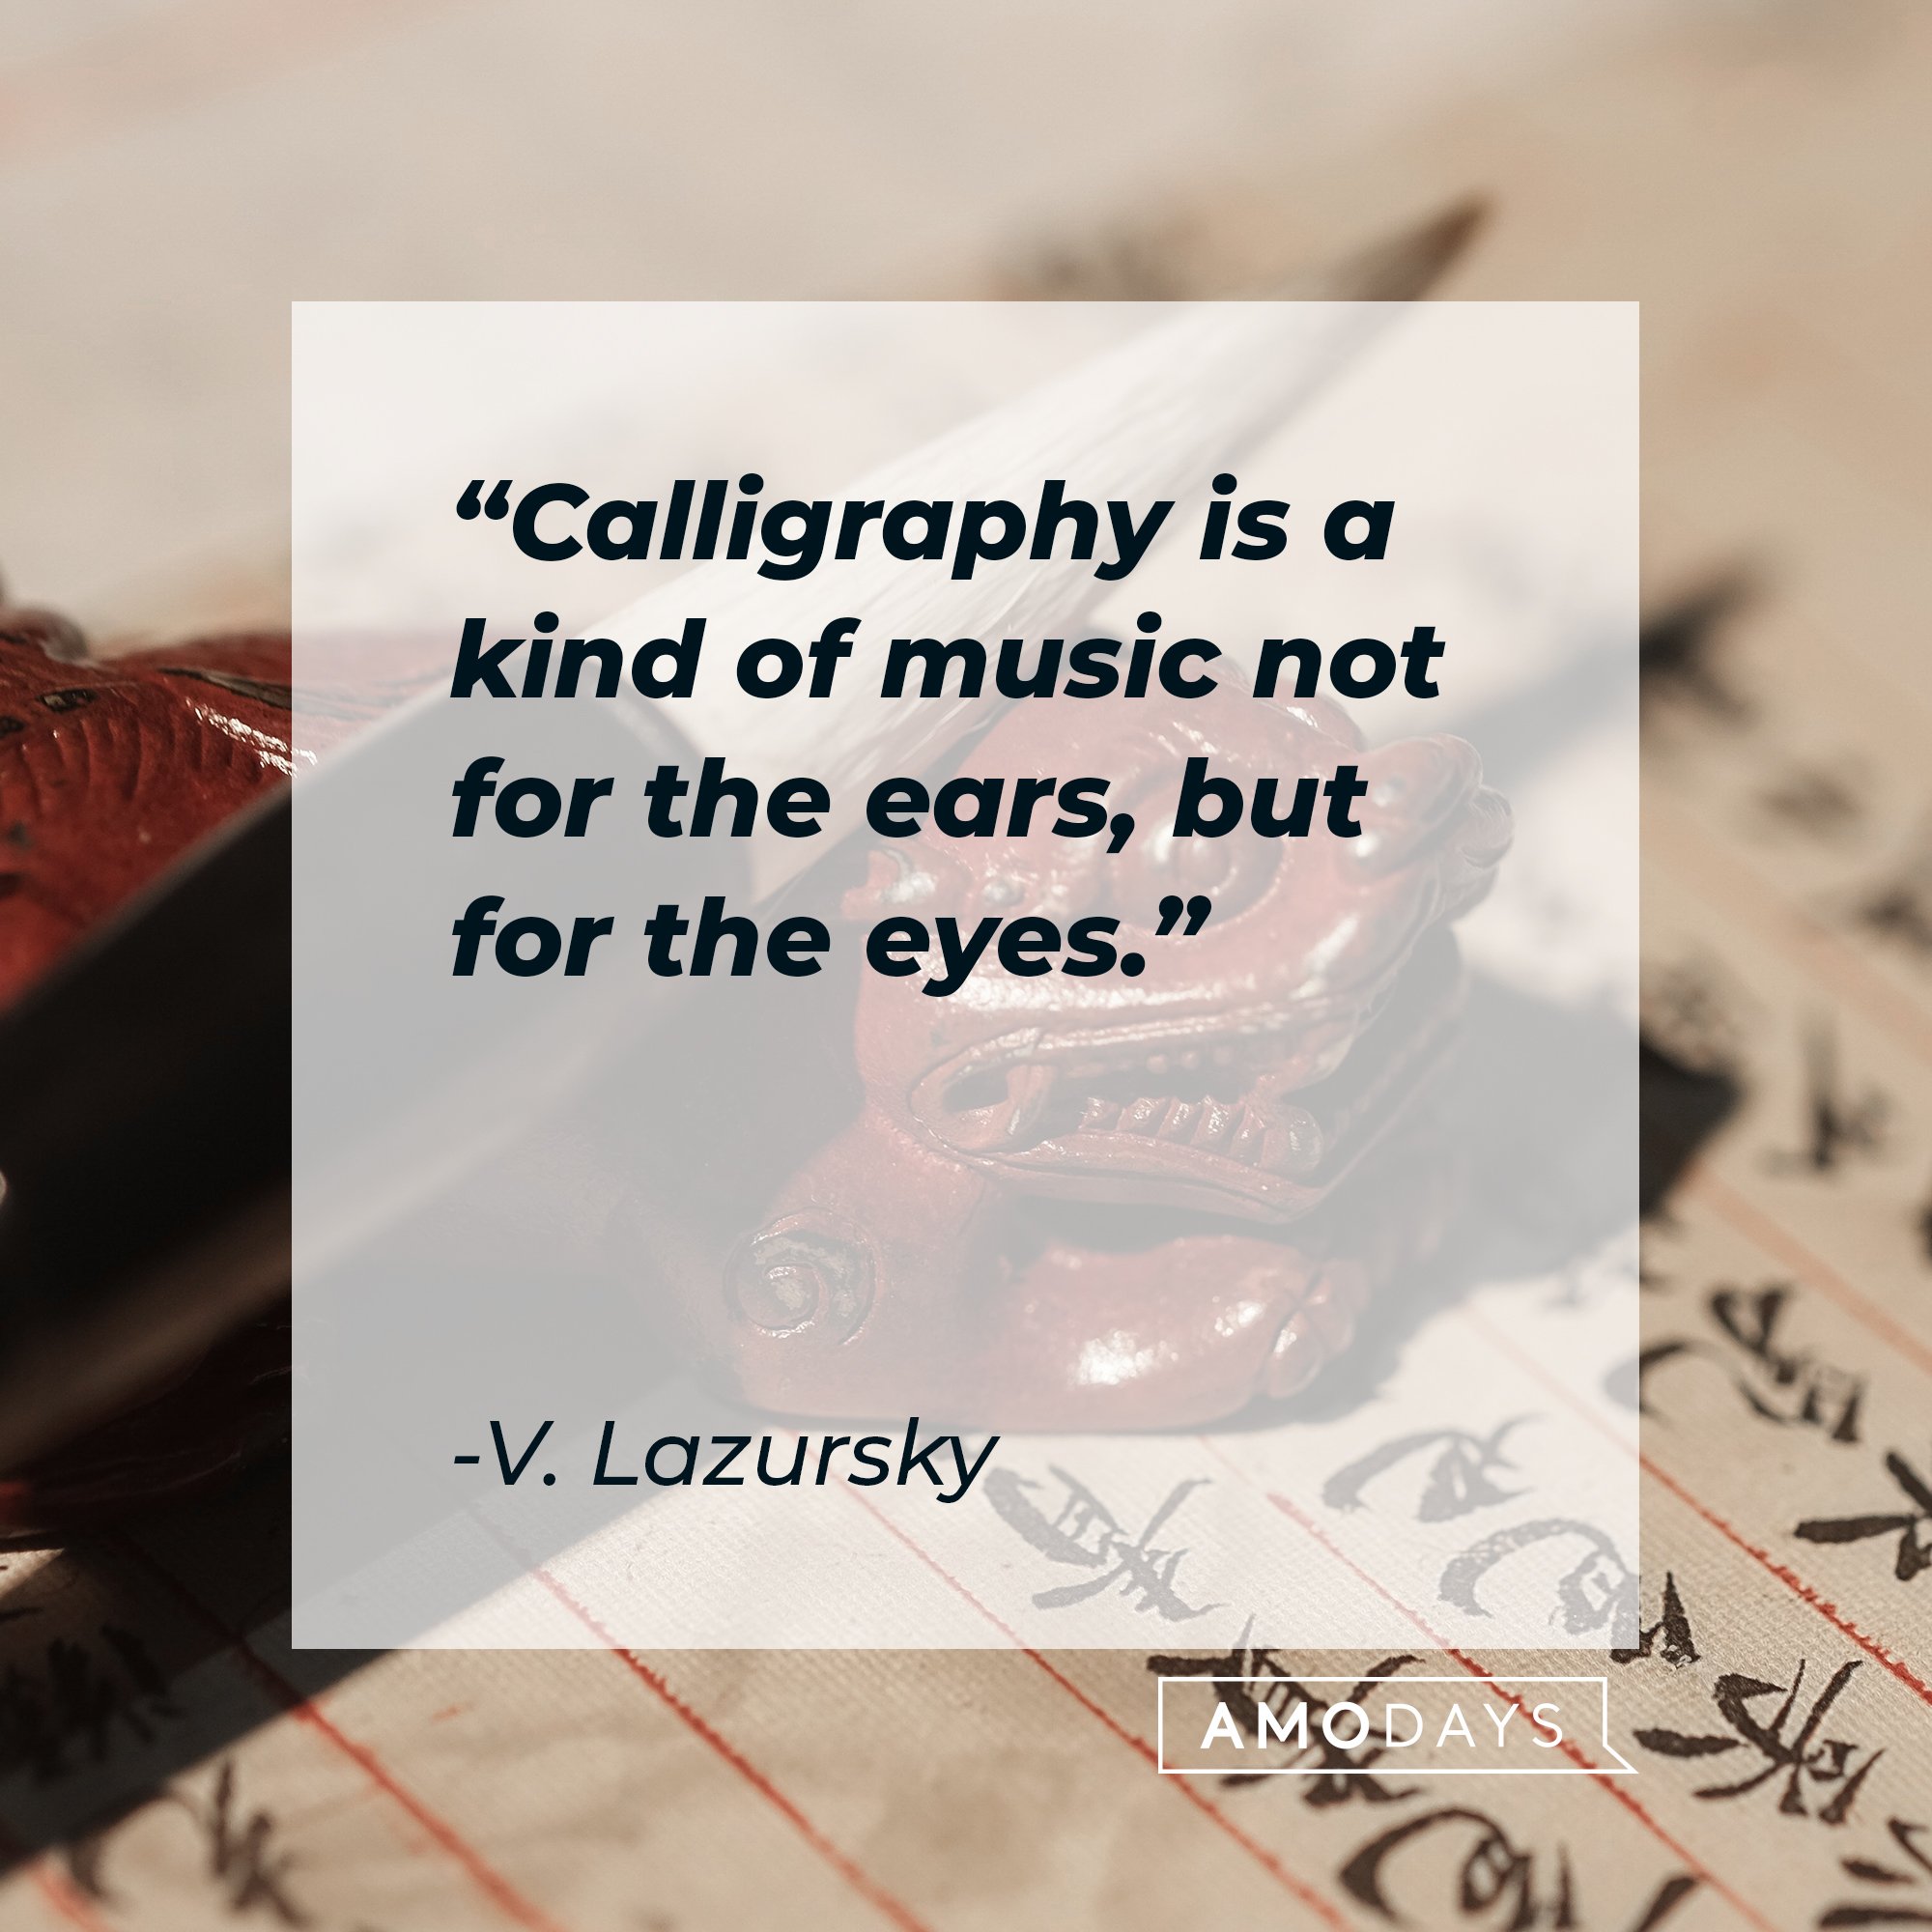 V. Lazursky’s quote: "Calligraphy is a kind of music not for the ears, but for the eyes." | Image: AmoDays 